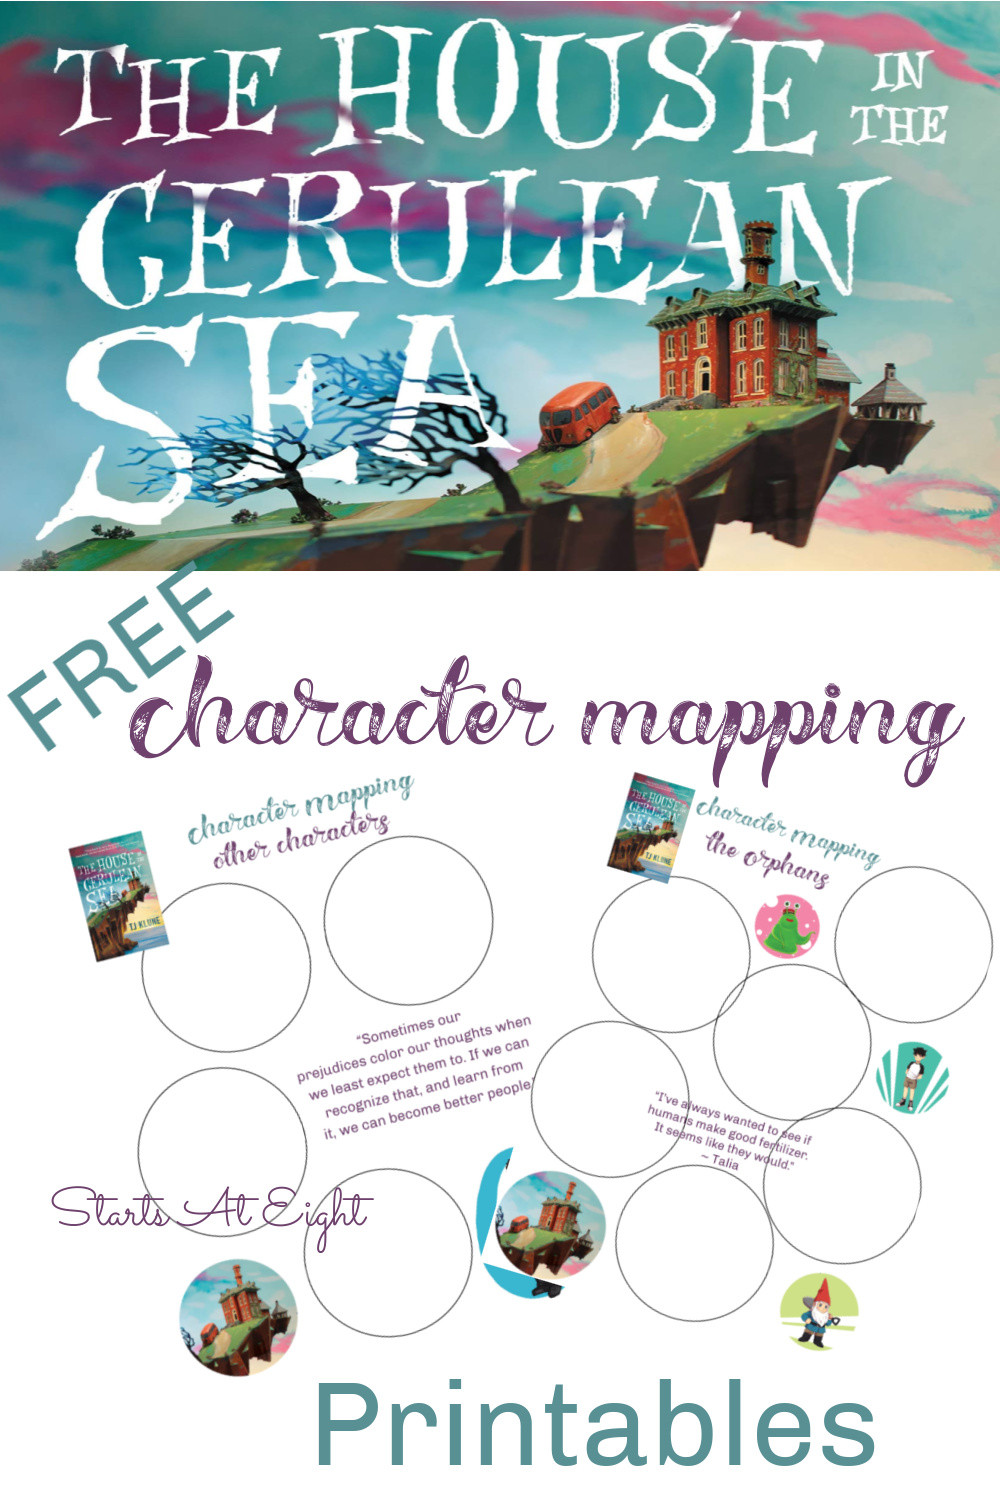 The House In The Cerulean Sea Character Mapping Free Printable Startsateight